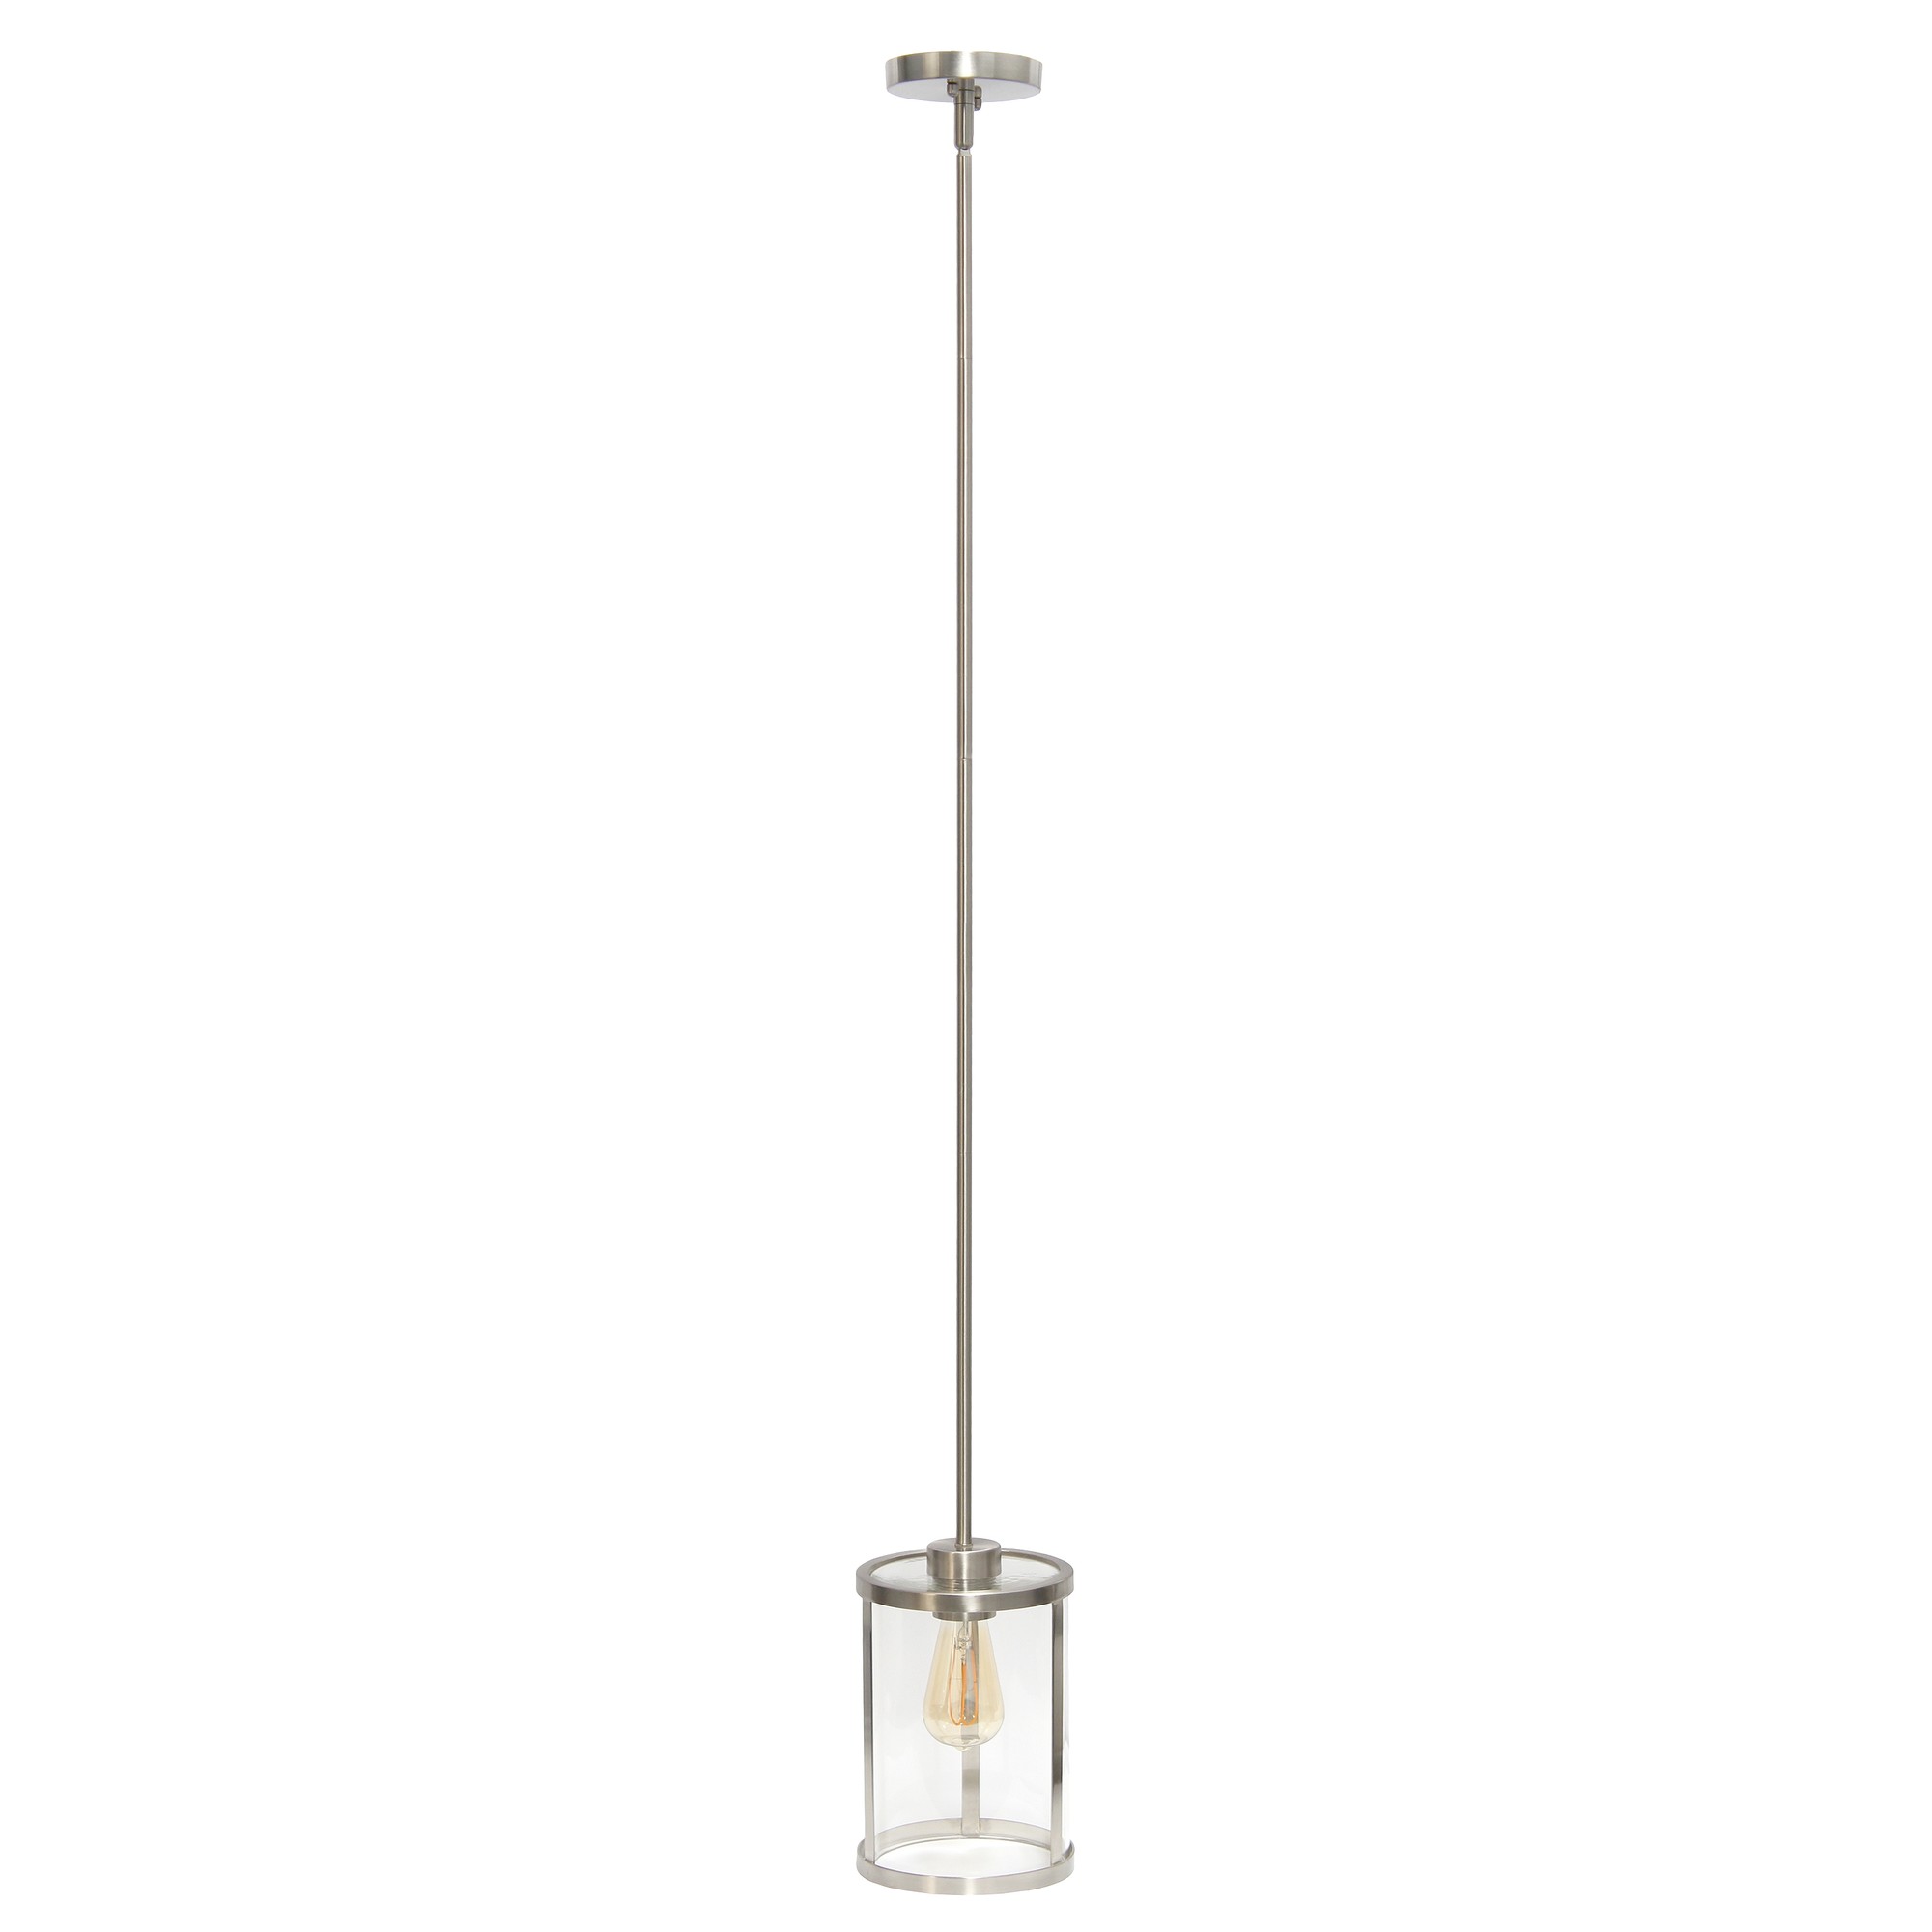 Lalia Home 1-Light 9.25" Modern Adjustable Hanging Cylindrical Clear Glass Pendant Fixture with Metal Accents, Brushed Nickel